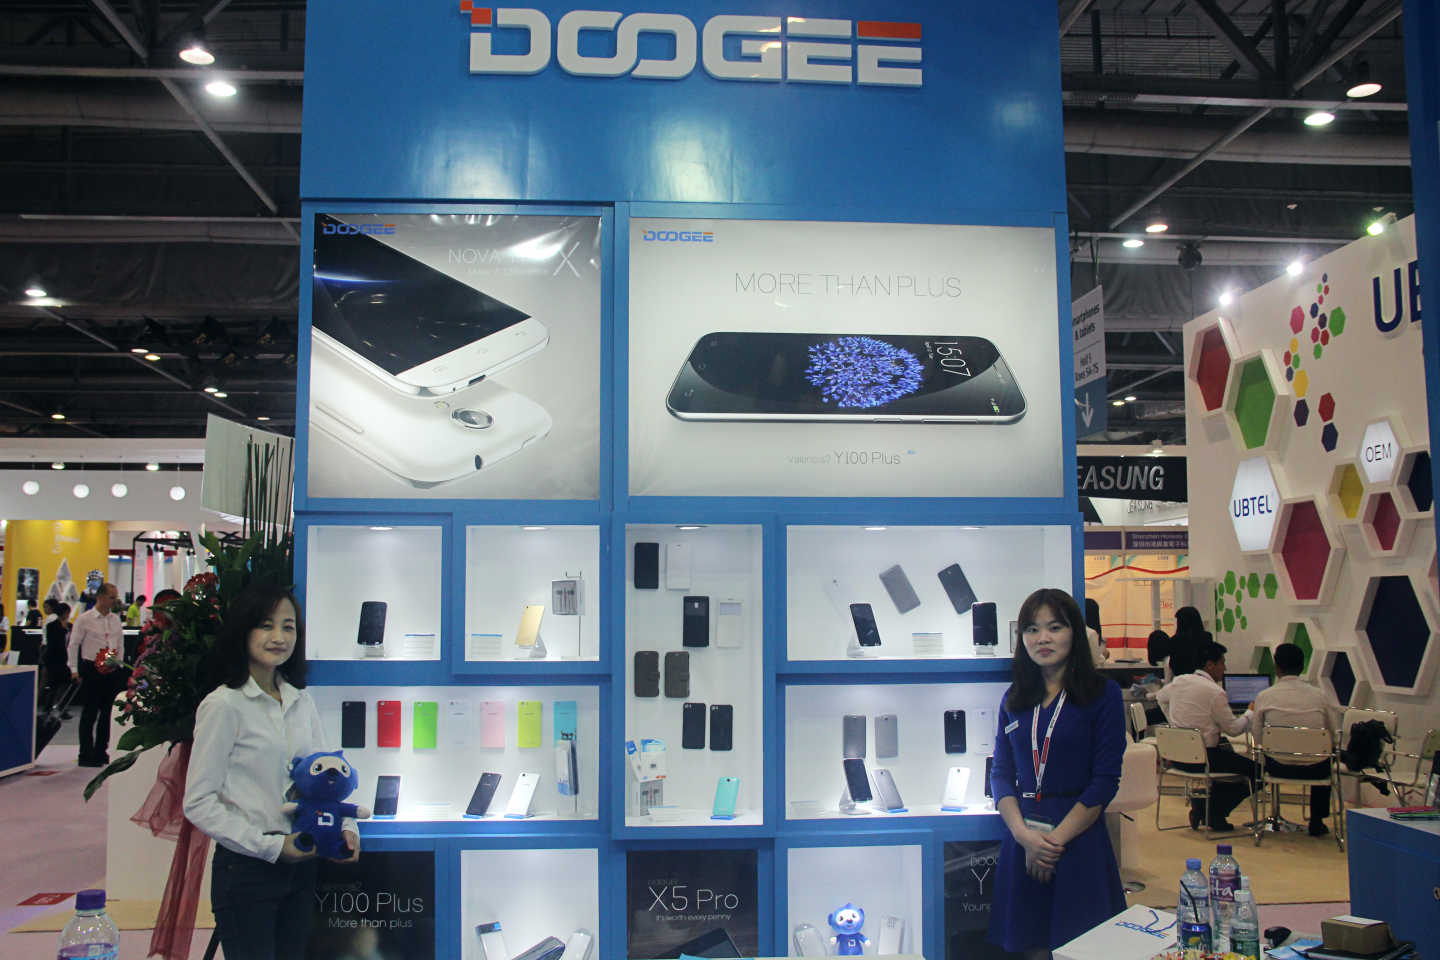 DOOGEE Took Another Successful Step